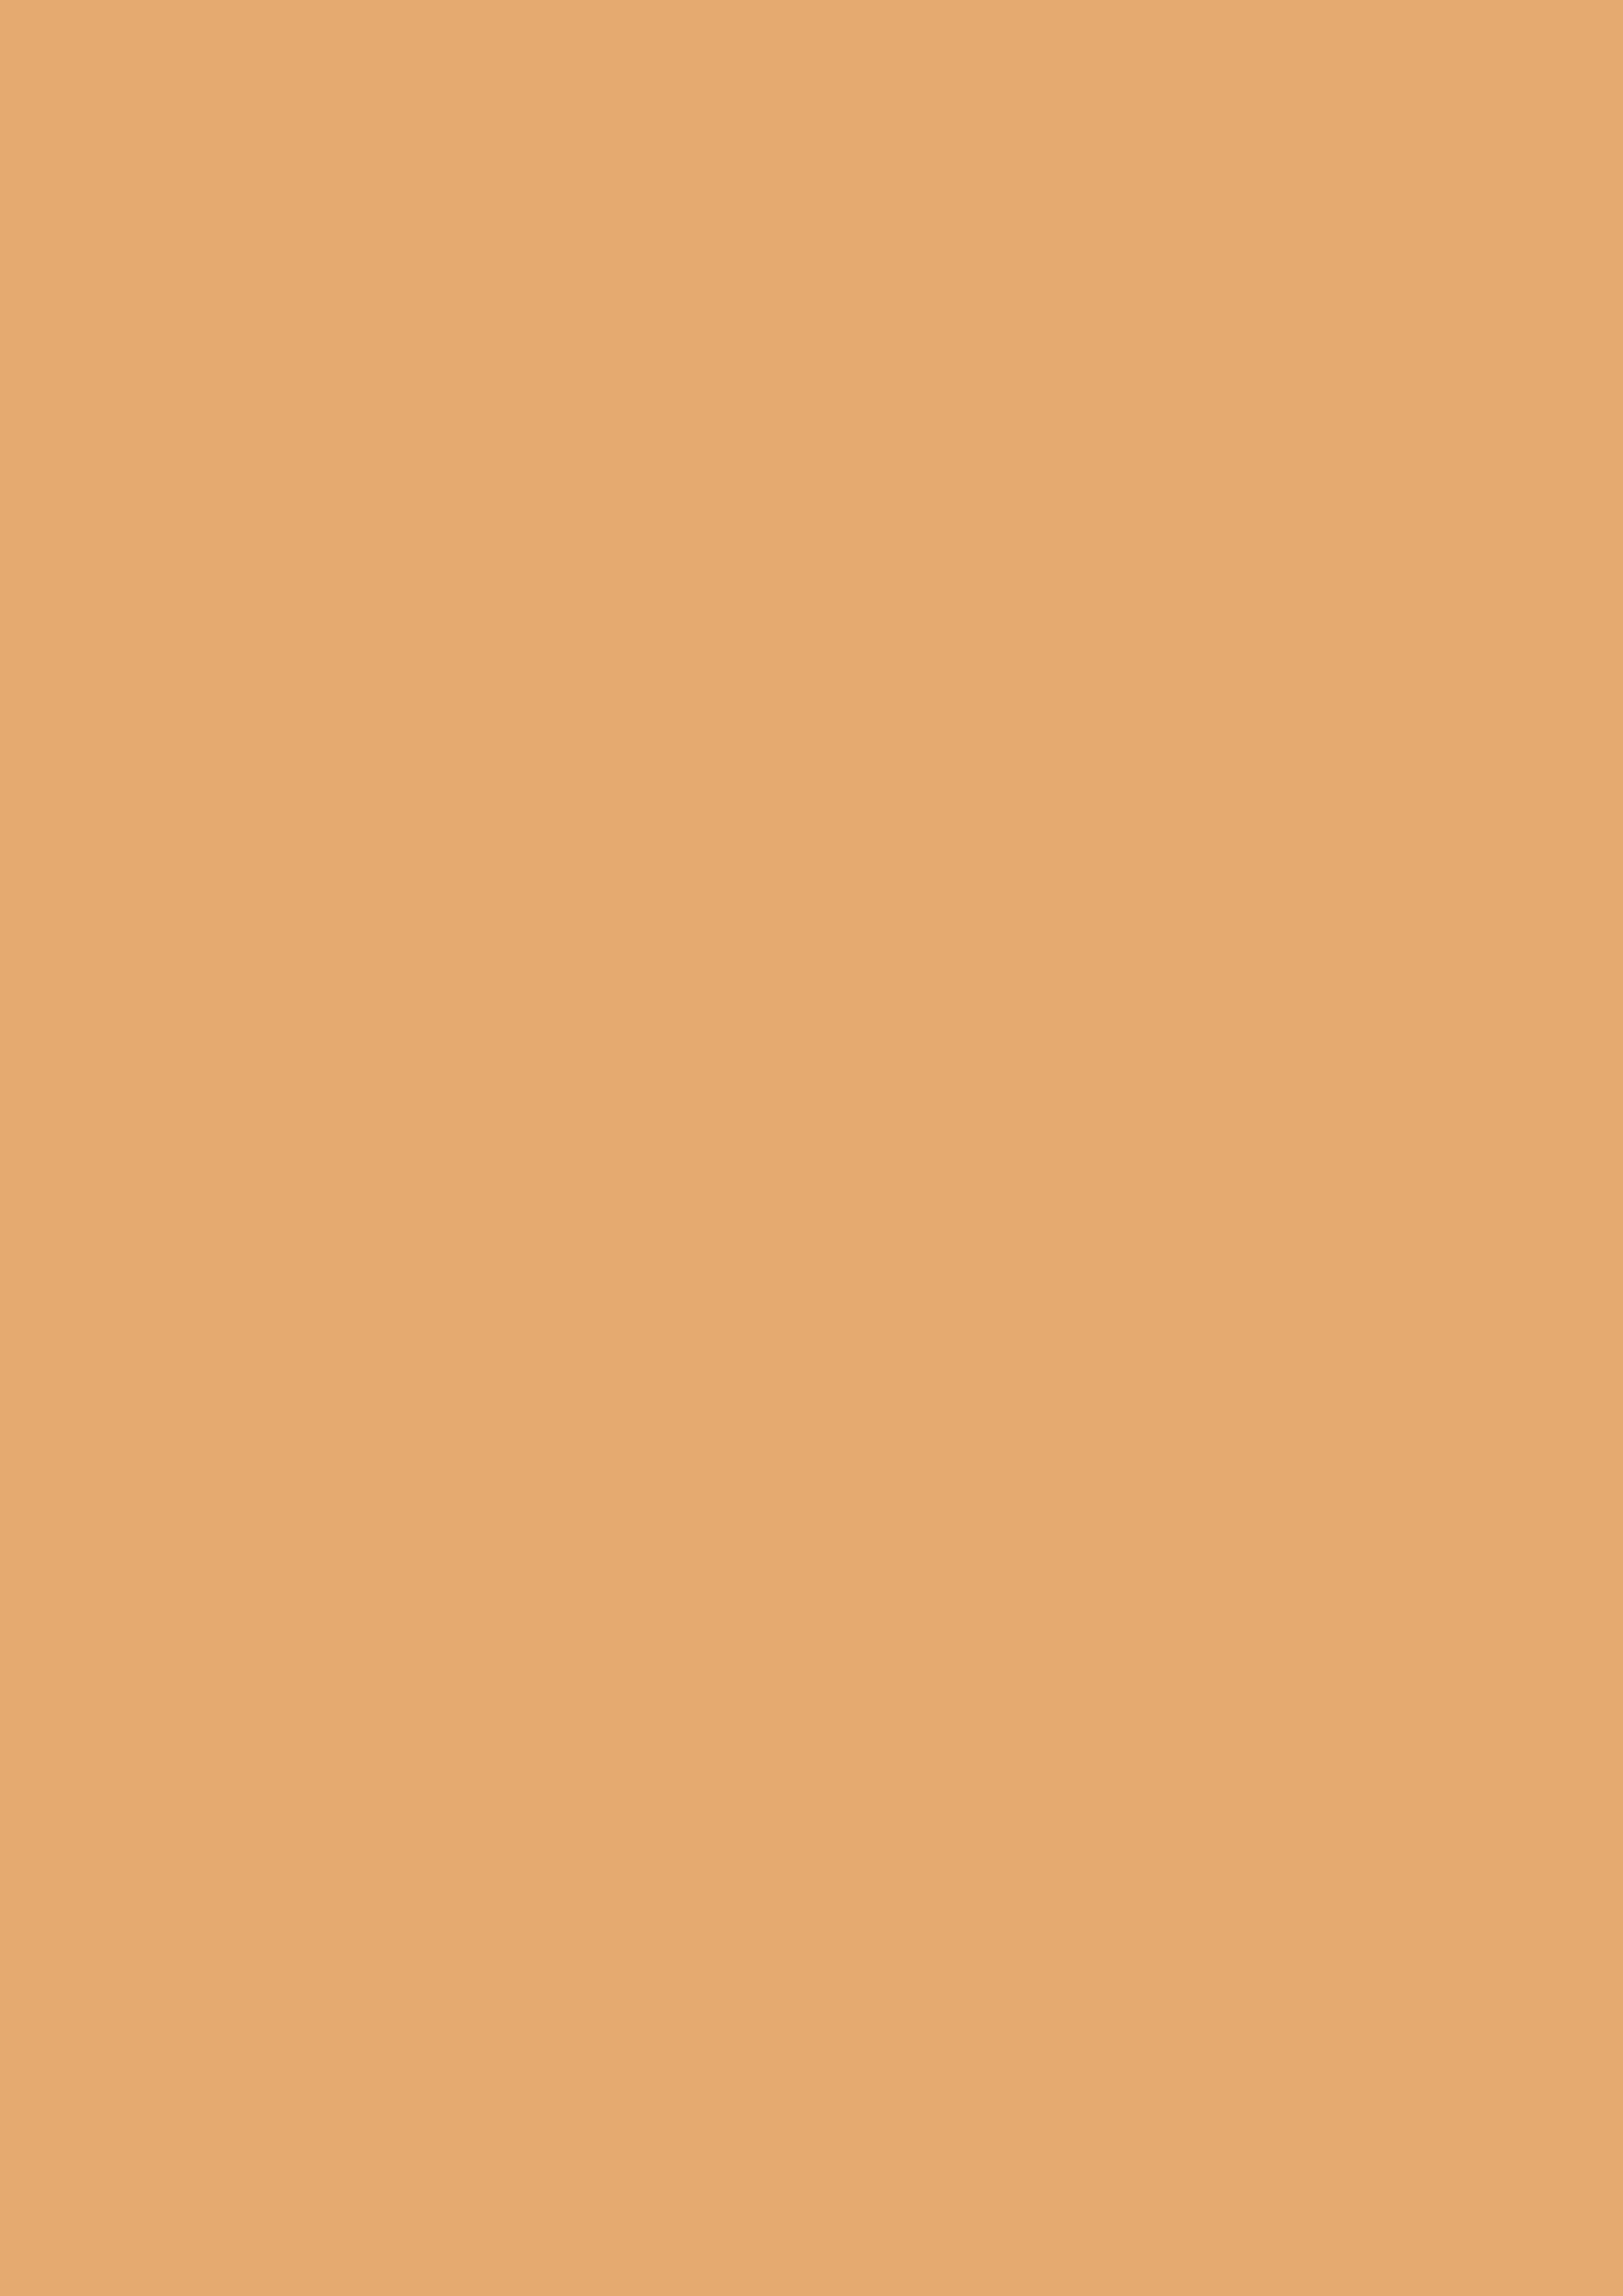 2480x3508 Fawn Solid Color Background